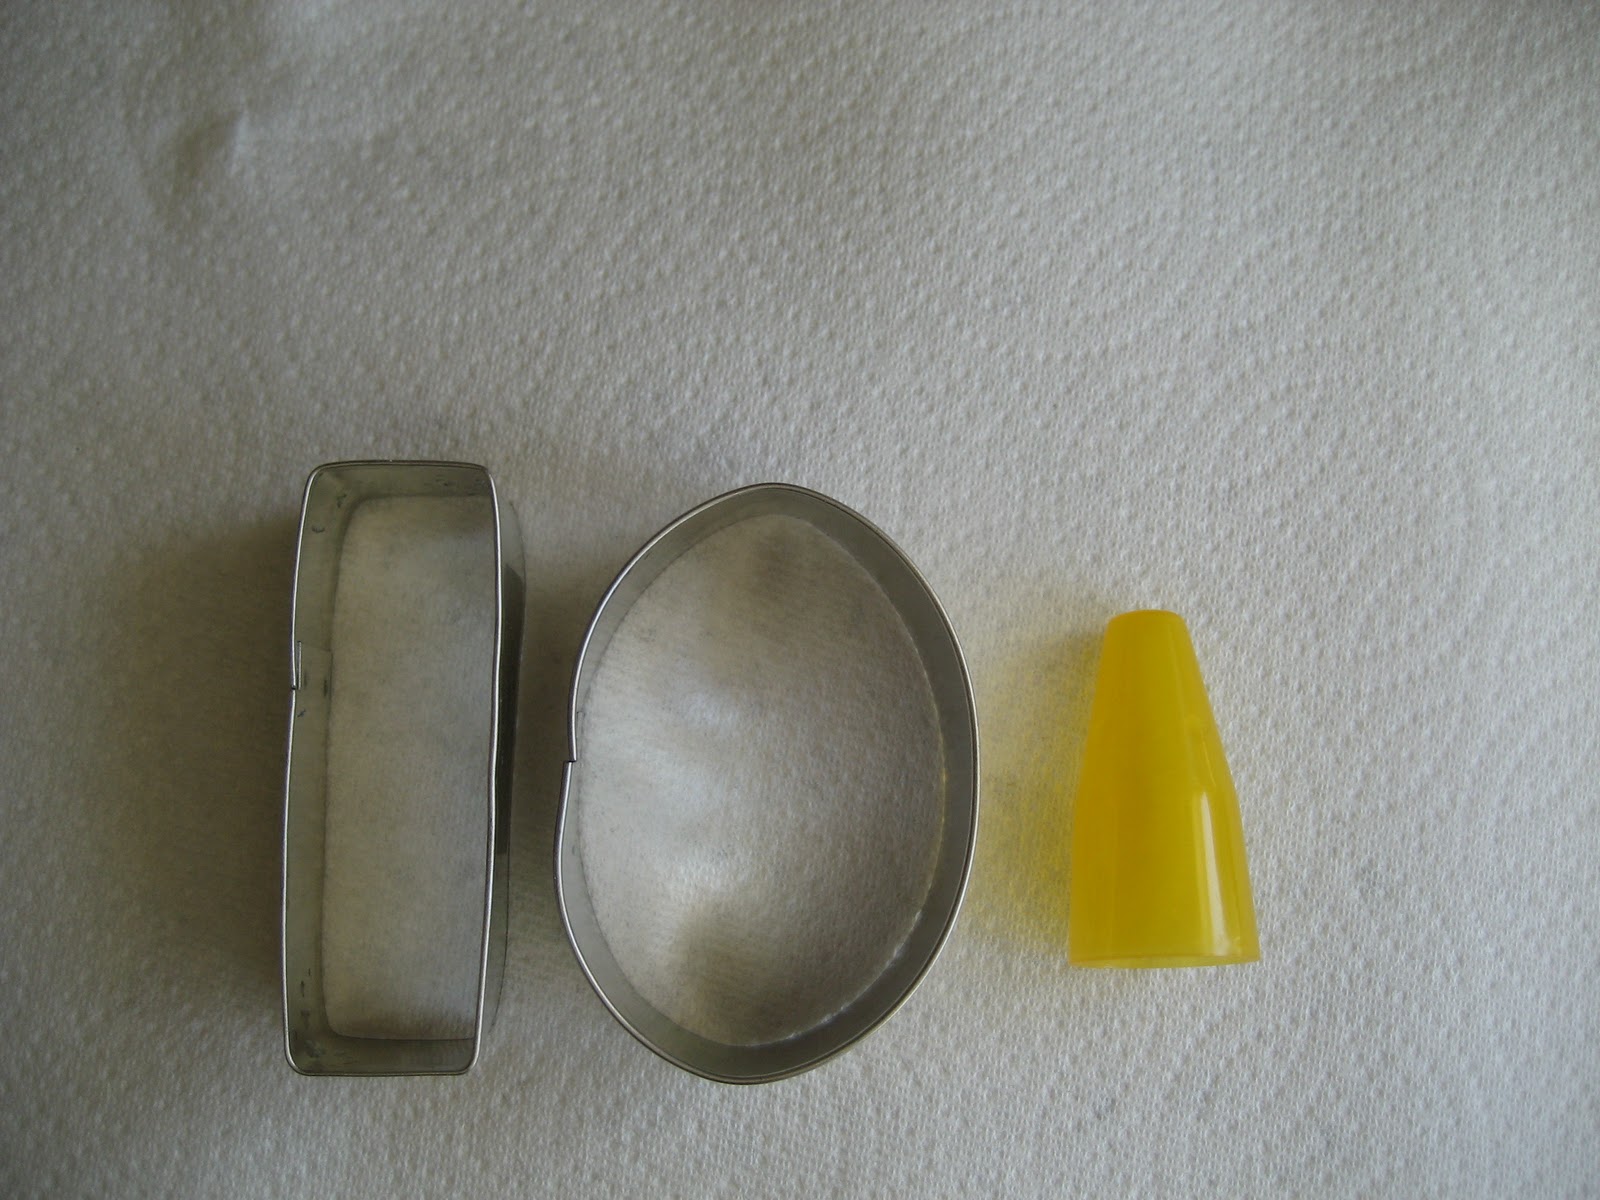 These are the cookie cutters I used to make the 100.